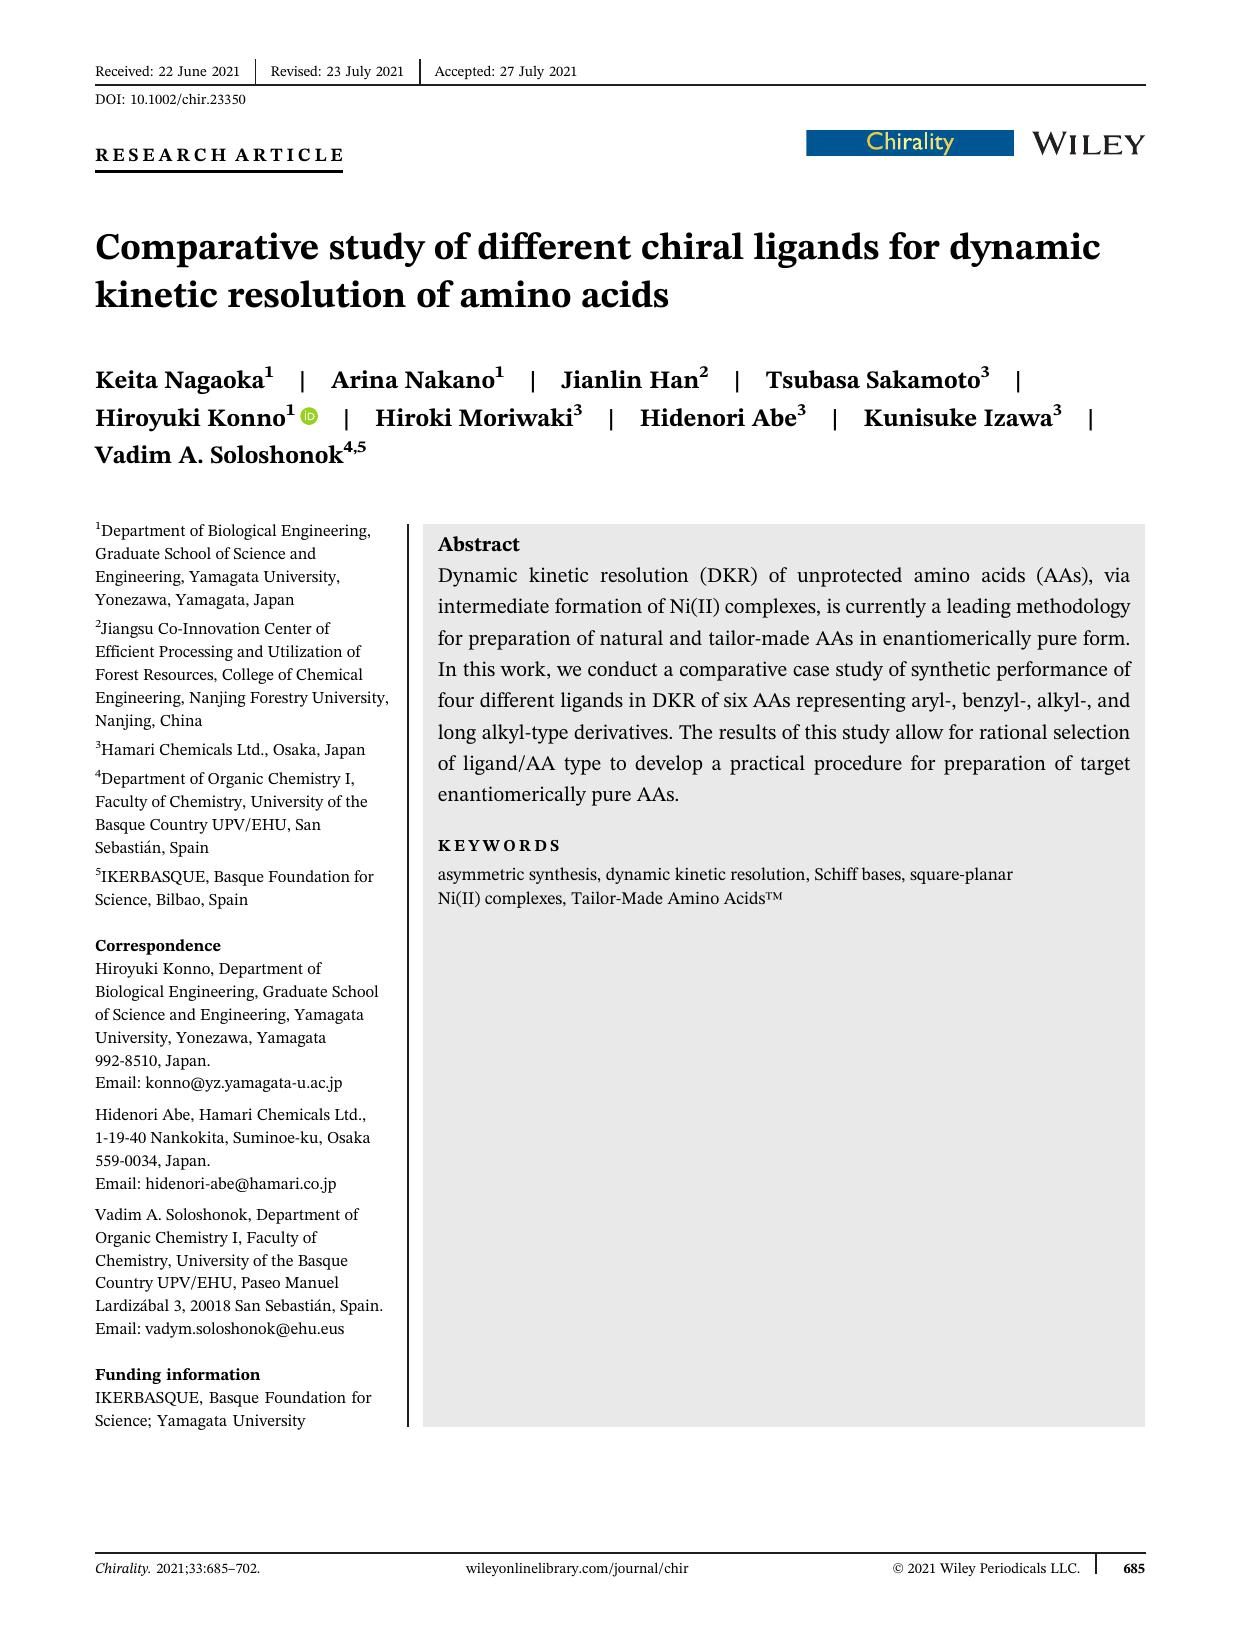 Comparative study of different chiral ligands for dynamic kinetic resolution of amino acids by unknow